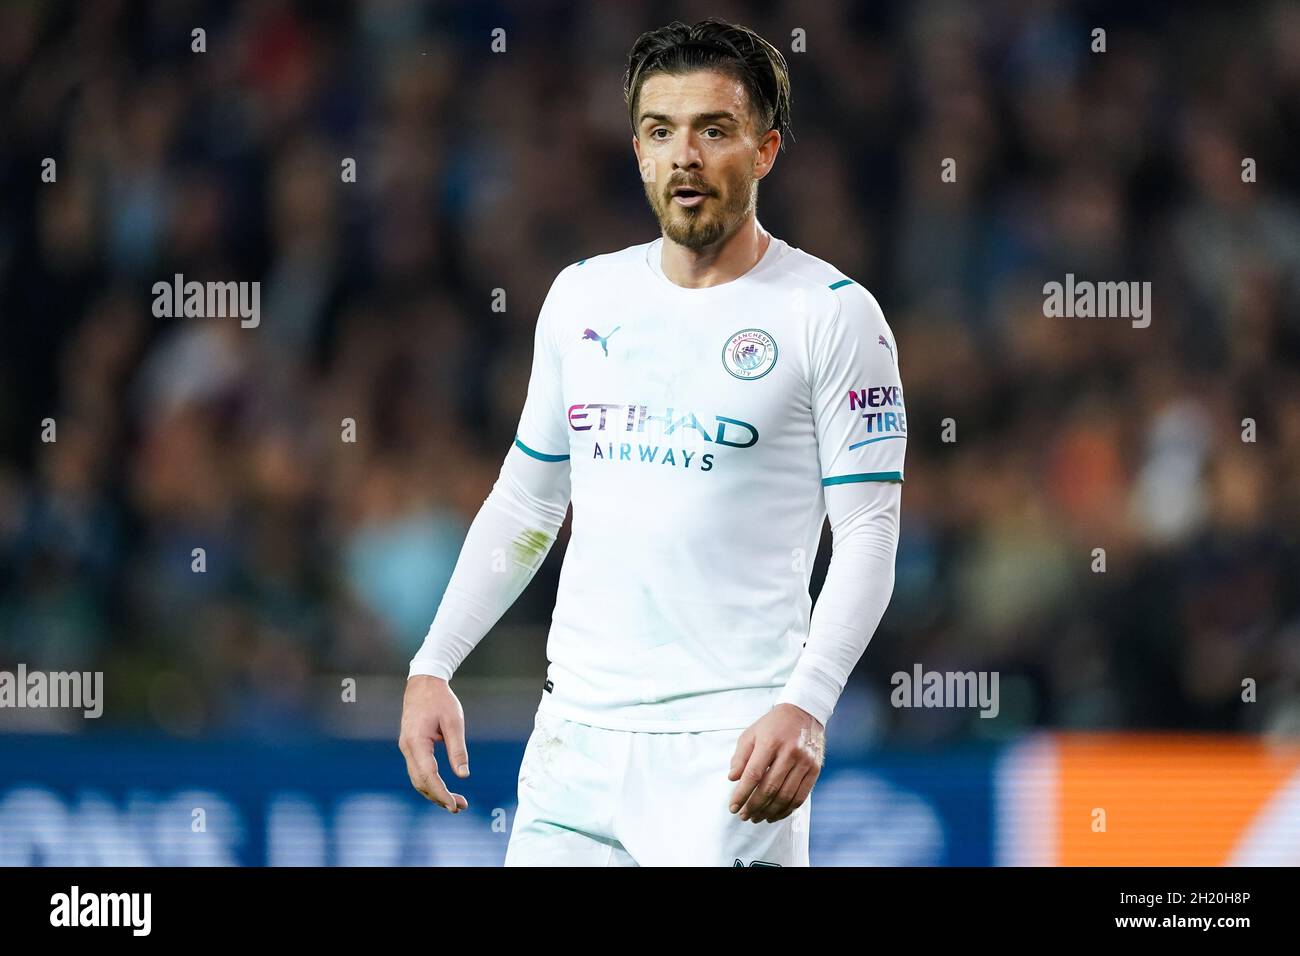 BRUGGE, BELGIUM - OCTOBER 19: Jack Grealish of Manchester City during the Group A - UEFA Champions League match between Club Brugge KV and Manchester City at Jan Breydelstadion on October 19, 2021 in Brugge, Belgium (Photo by Jeroen Meuwsen/Orange Pictures) Stock Photo